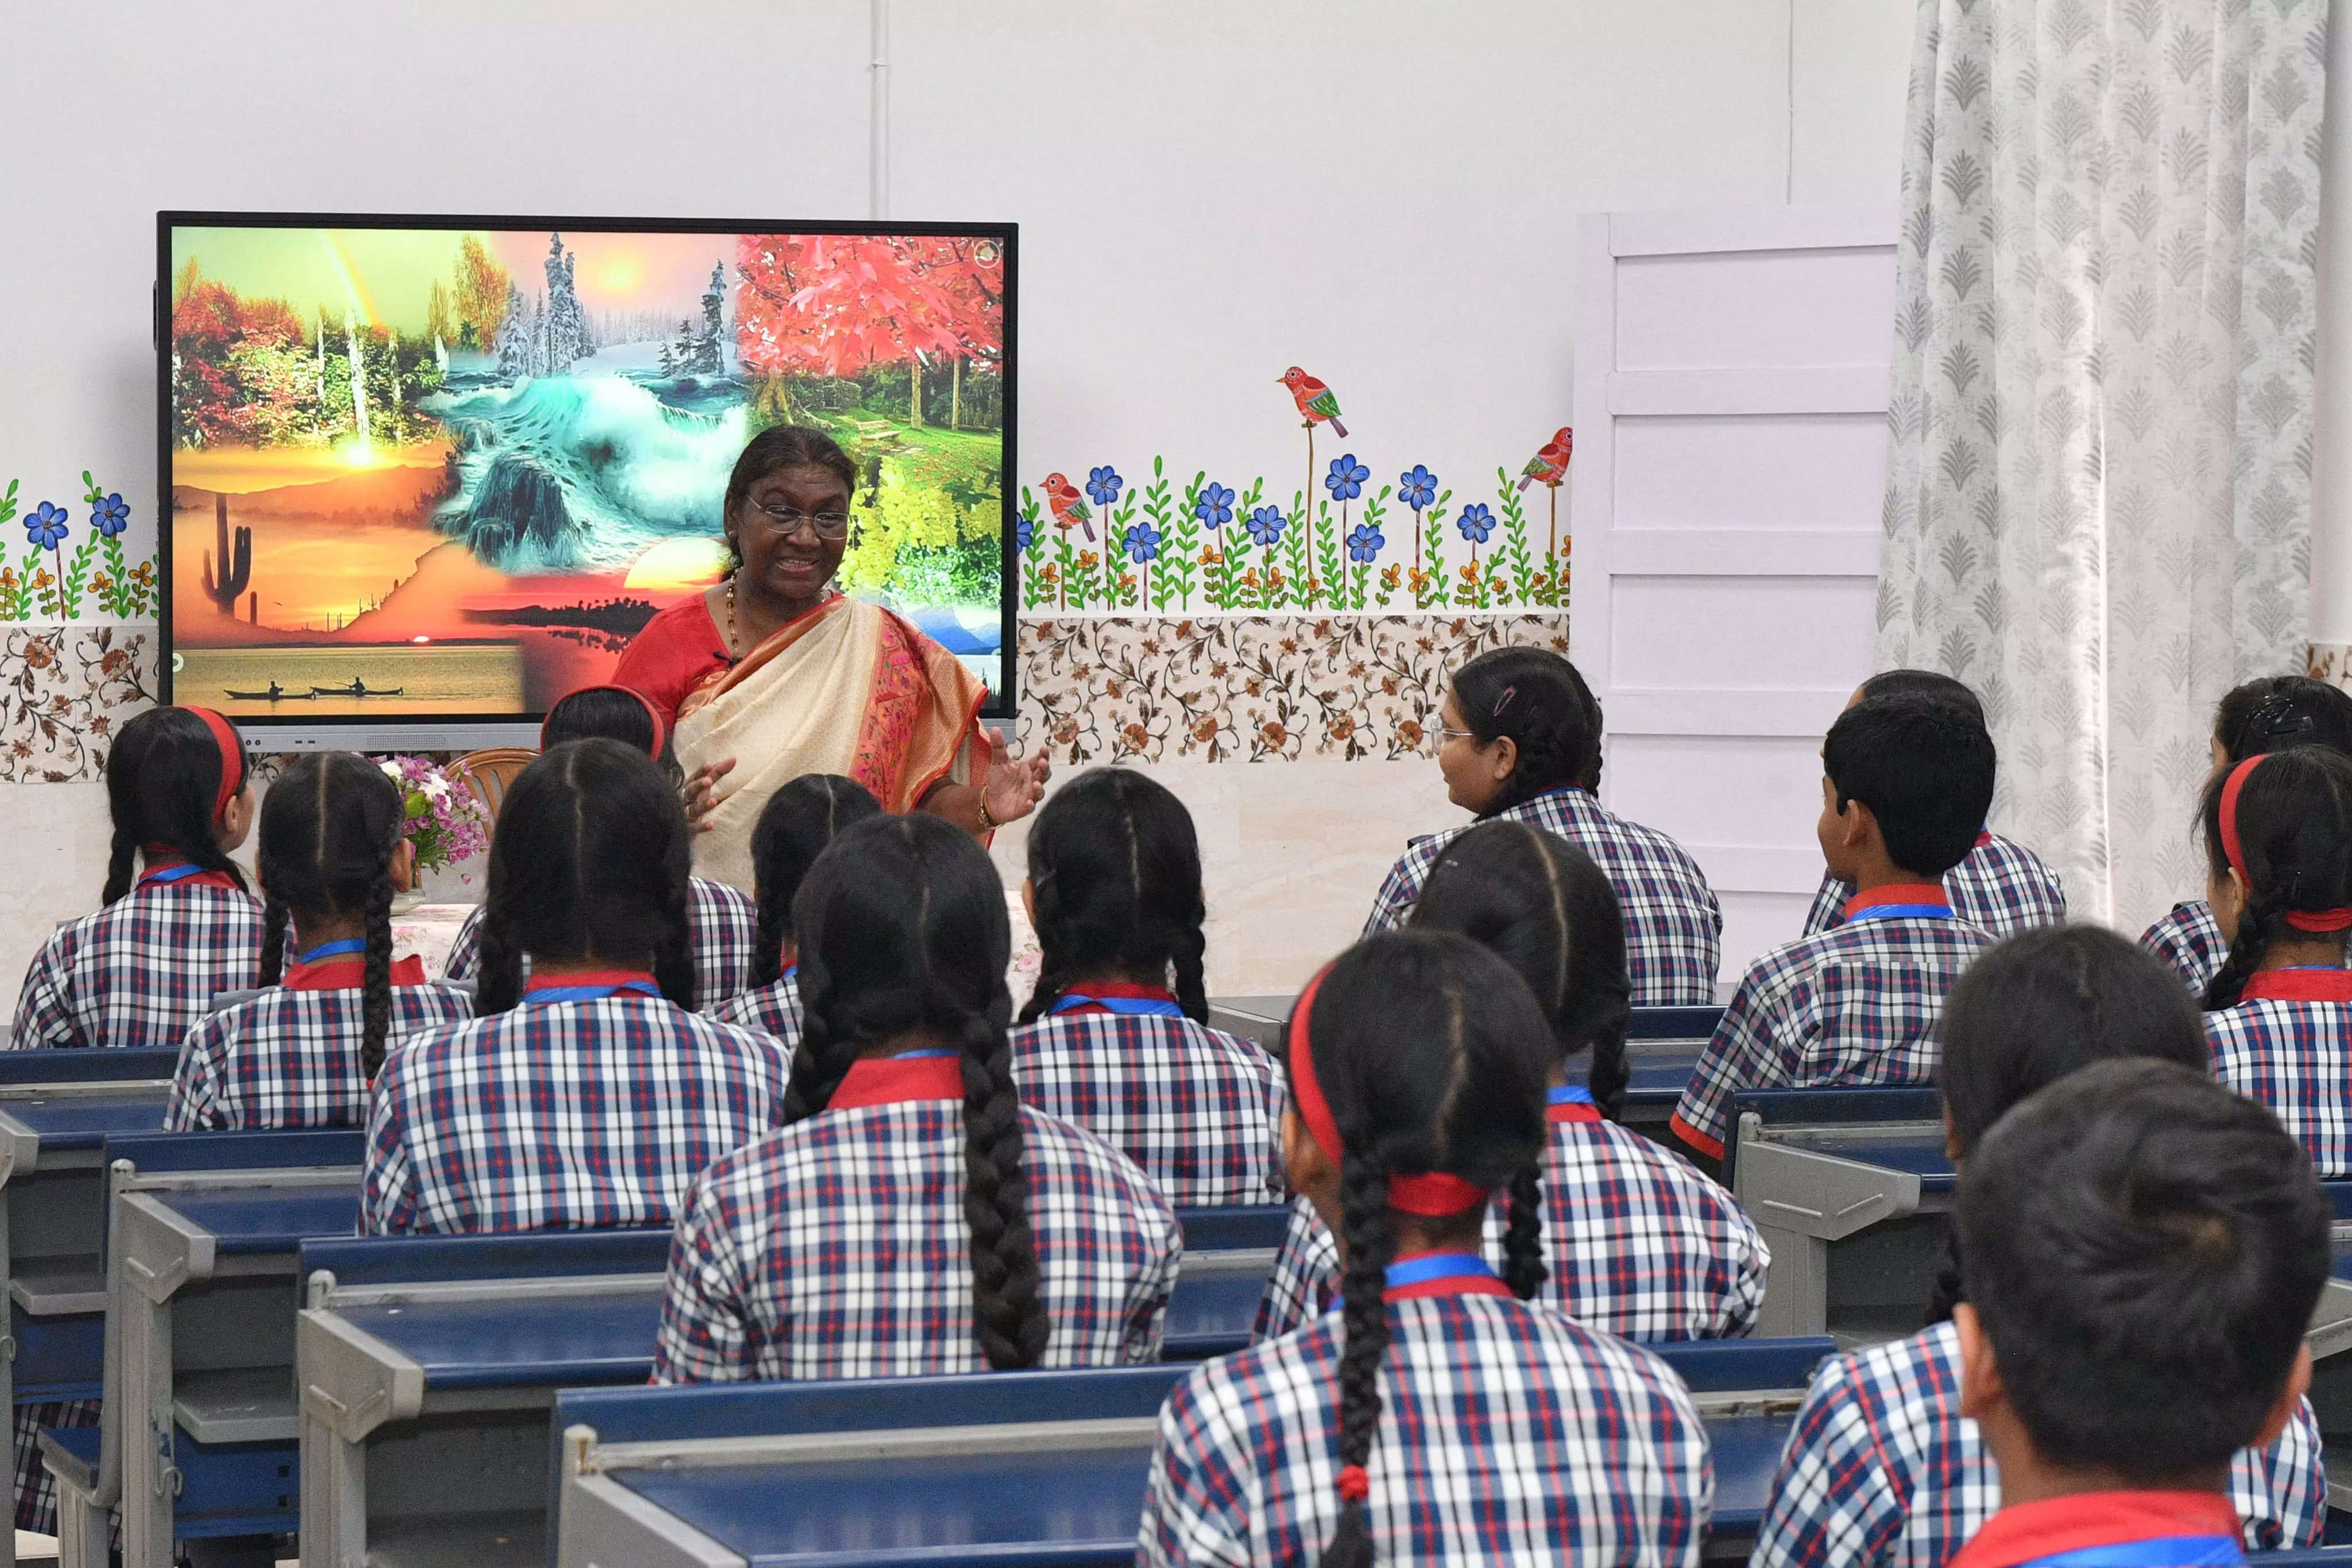 President Murmu takes up role of teacher for school students, stresses environment conservation 